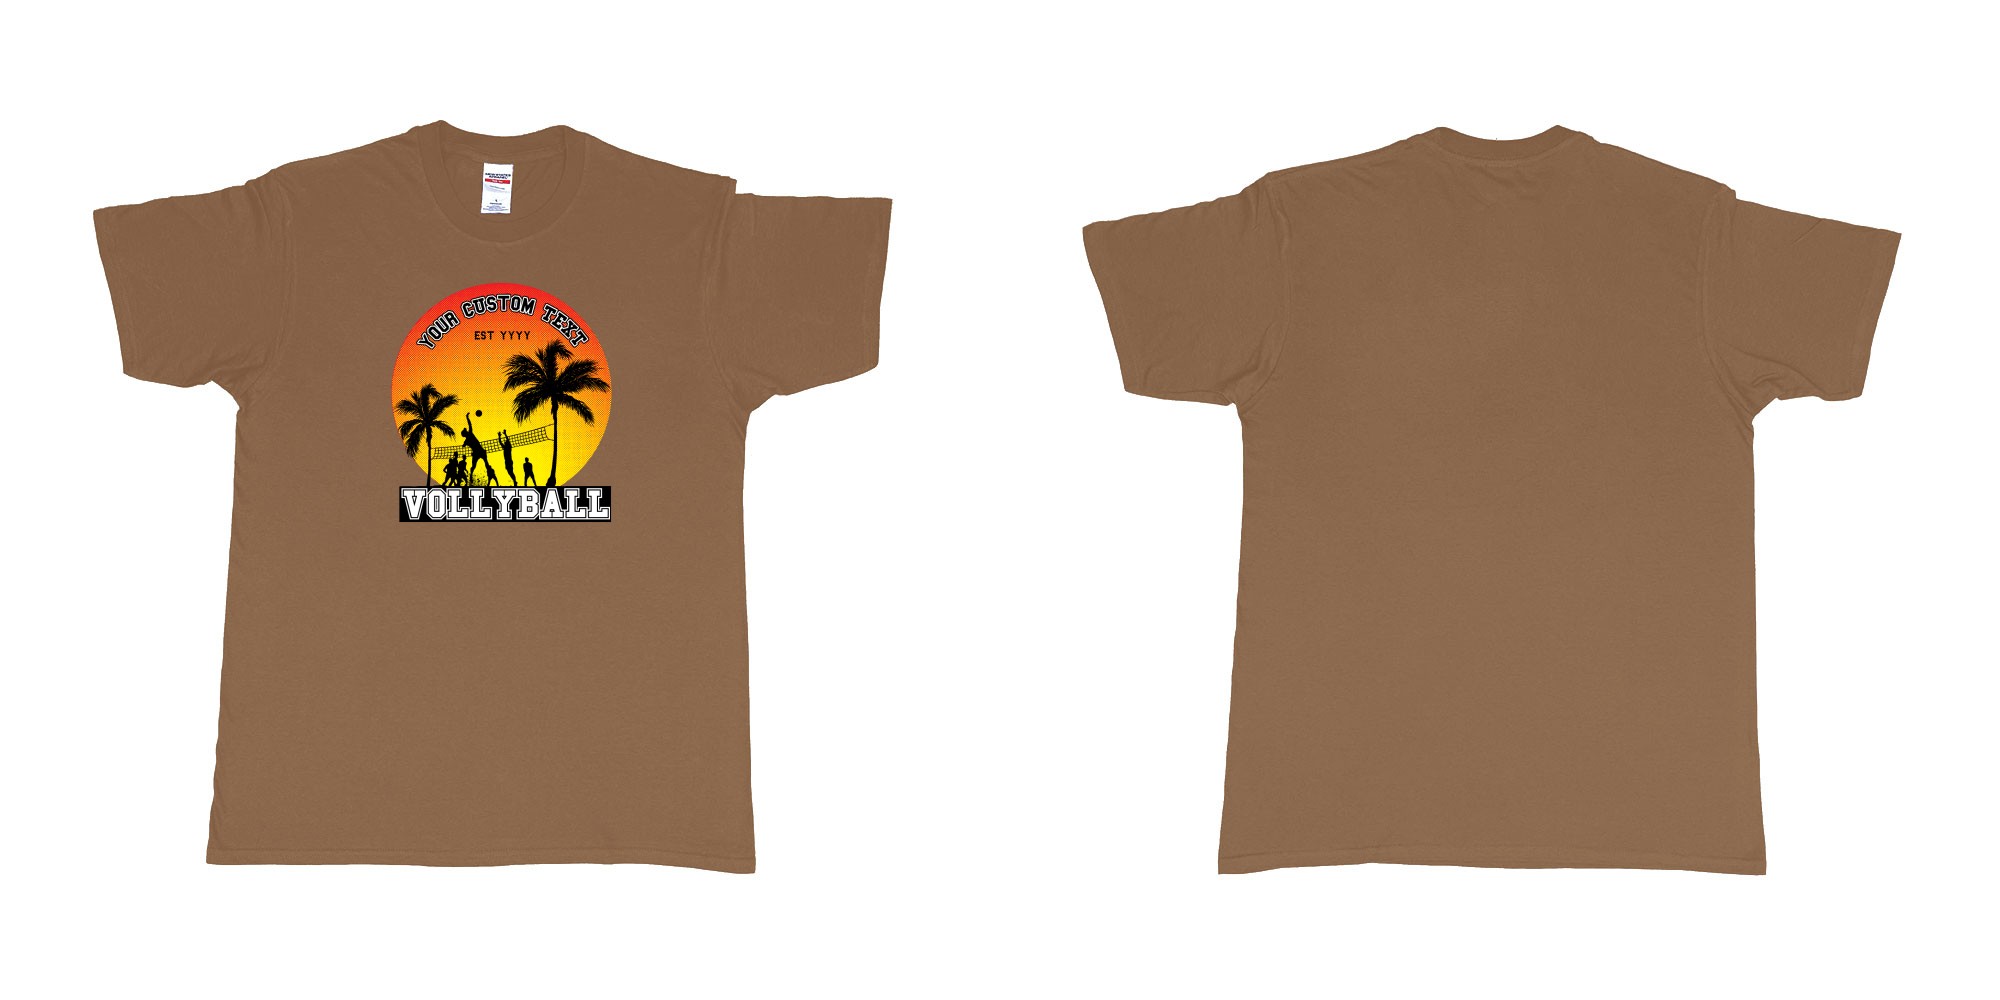 Custom tshirt design sunset volleyball t shirt with a sunset view and your custom print text and year in fabric color chestnut choice your own text made in Bali by The Pirate Way